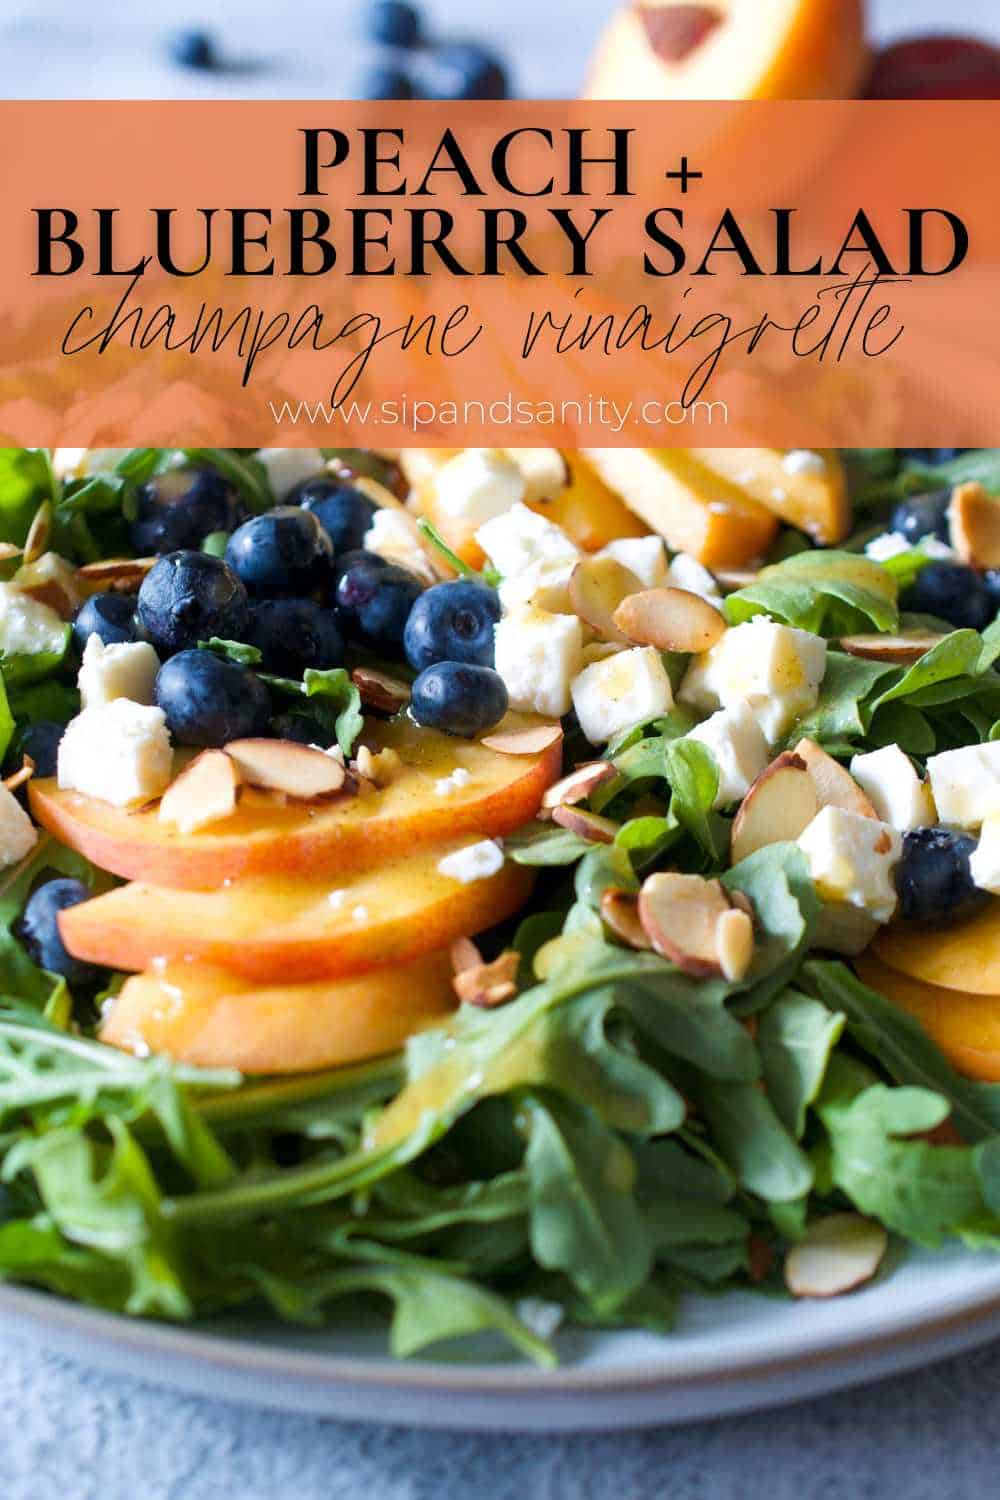 Pin image for peach and blueberry salad with champagne vinaigrette.